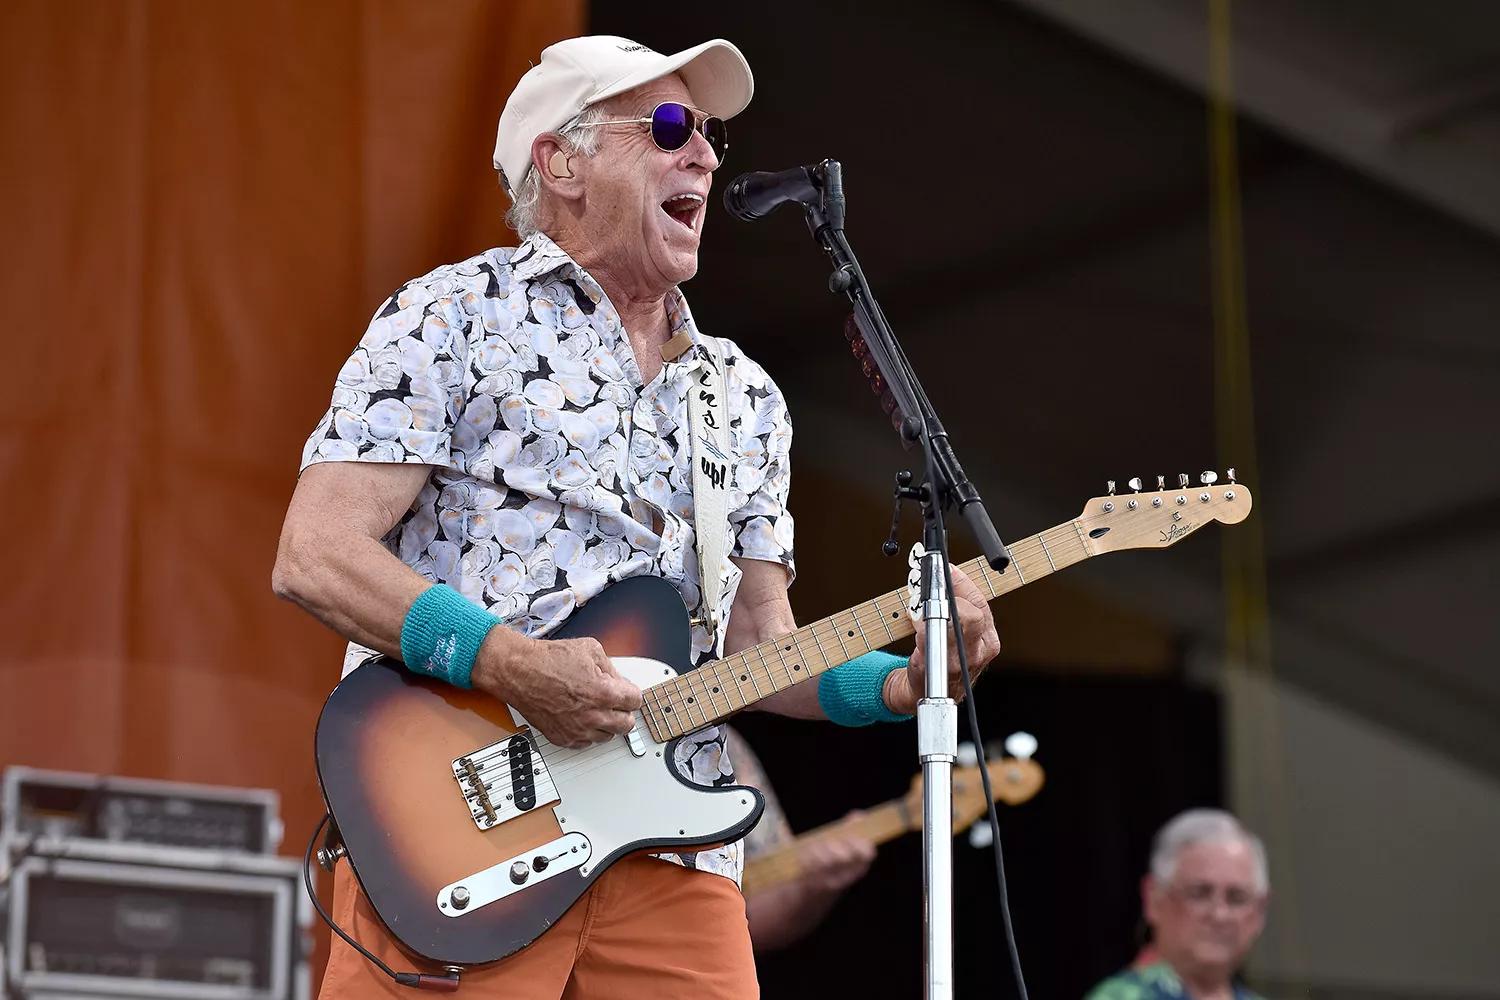 Remembering Jimmy Buffett's Last Adventures: How the "Margaritaville" Singer Lived Life to the Fullest Despite Cancer, According to Close Friend Carl Hiaasen